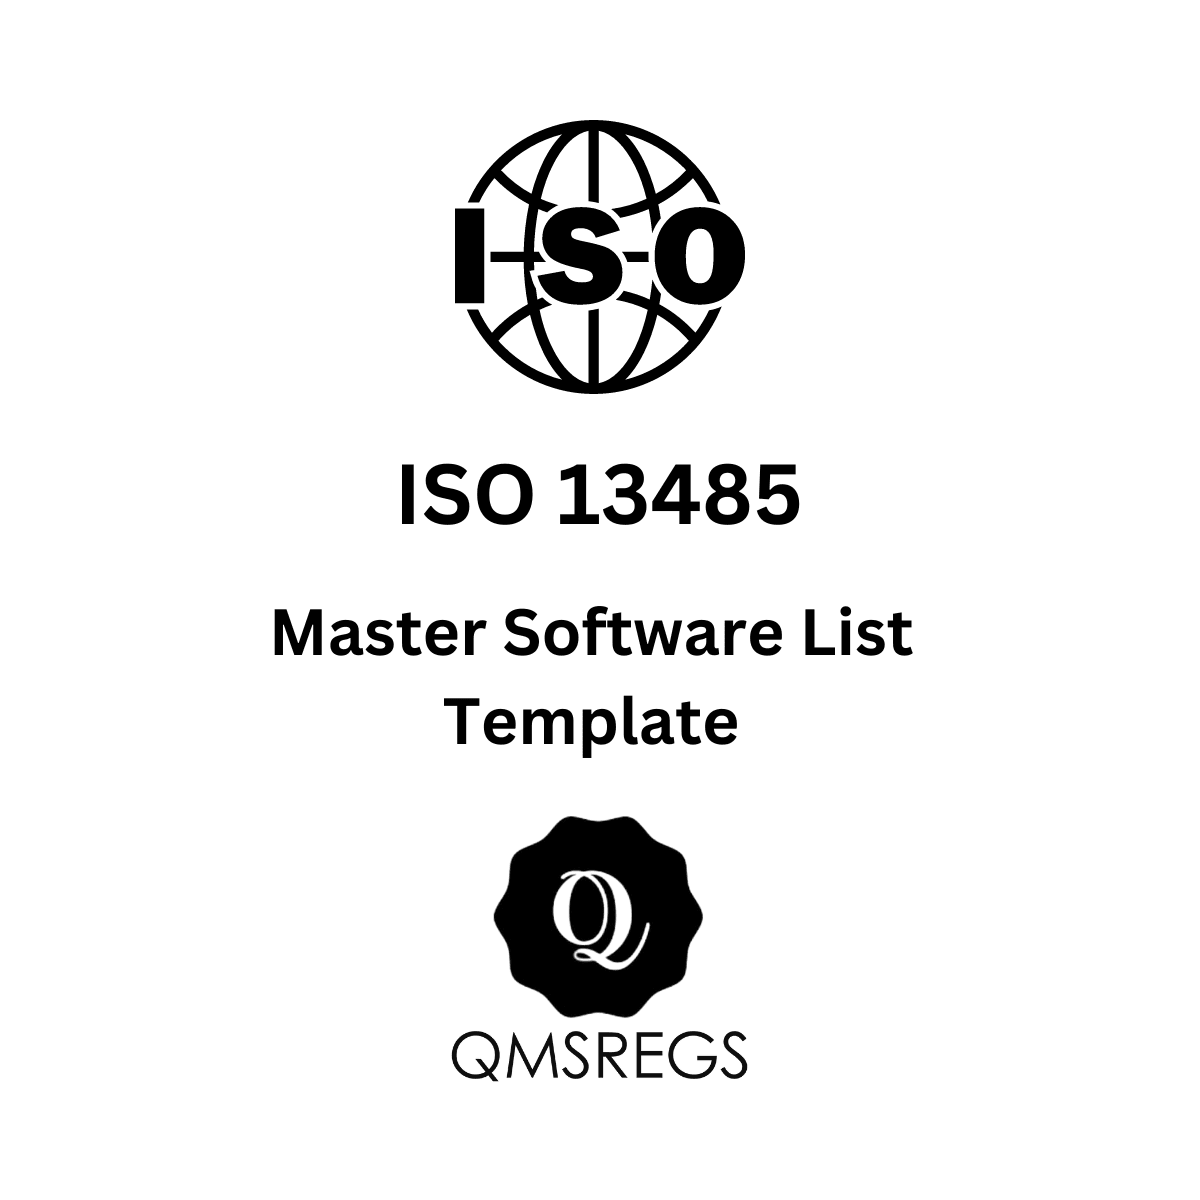 ISO 13485 Master Software List Template